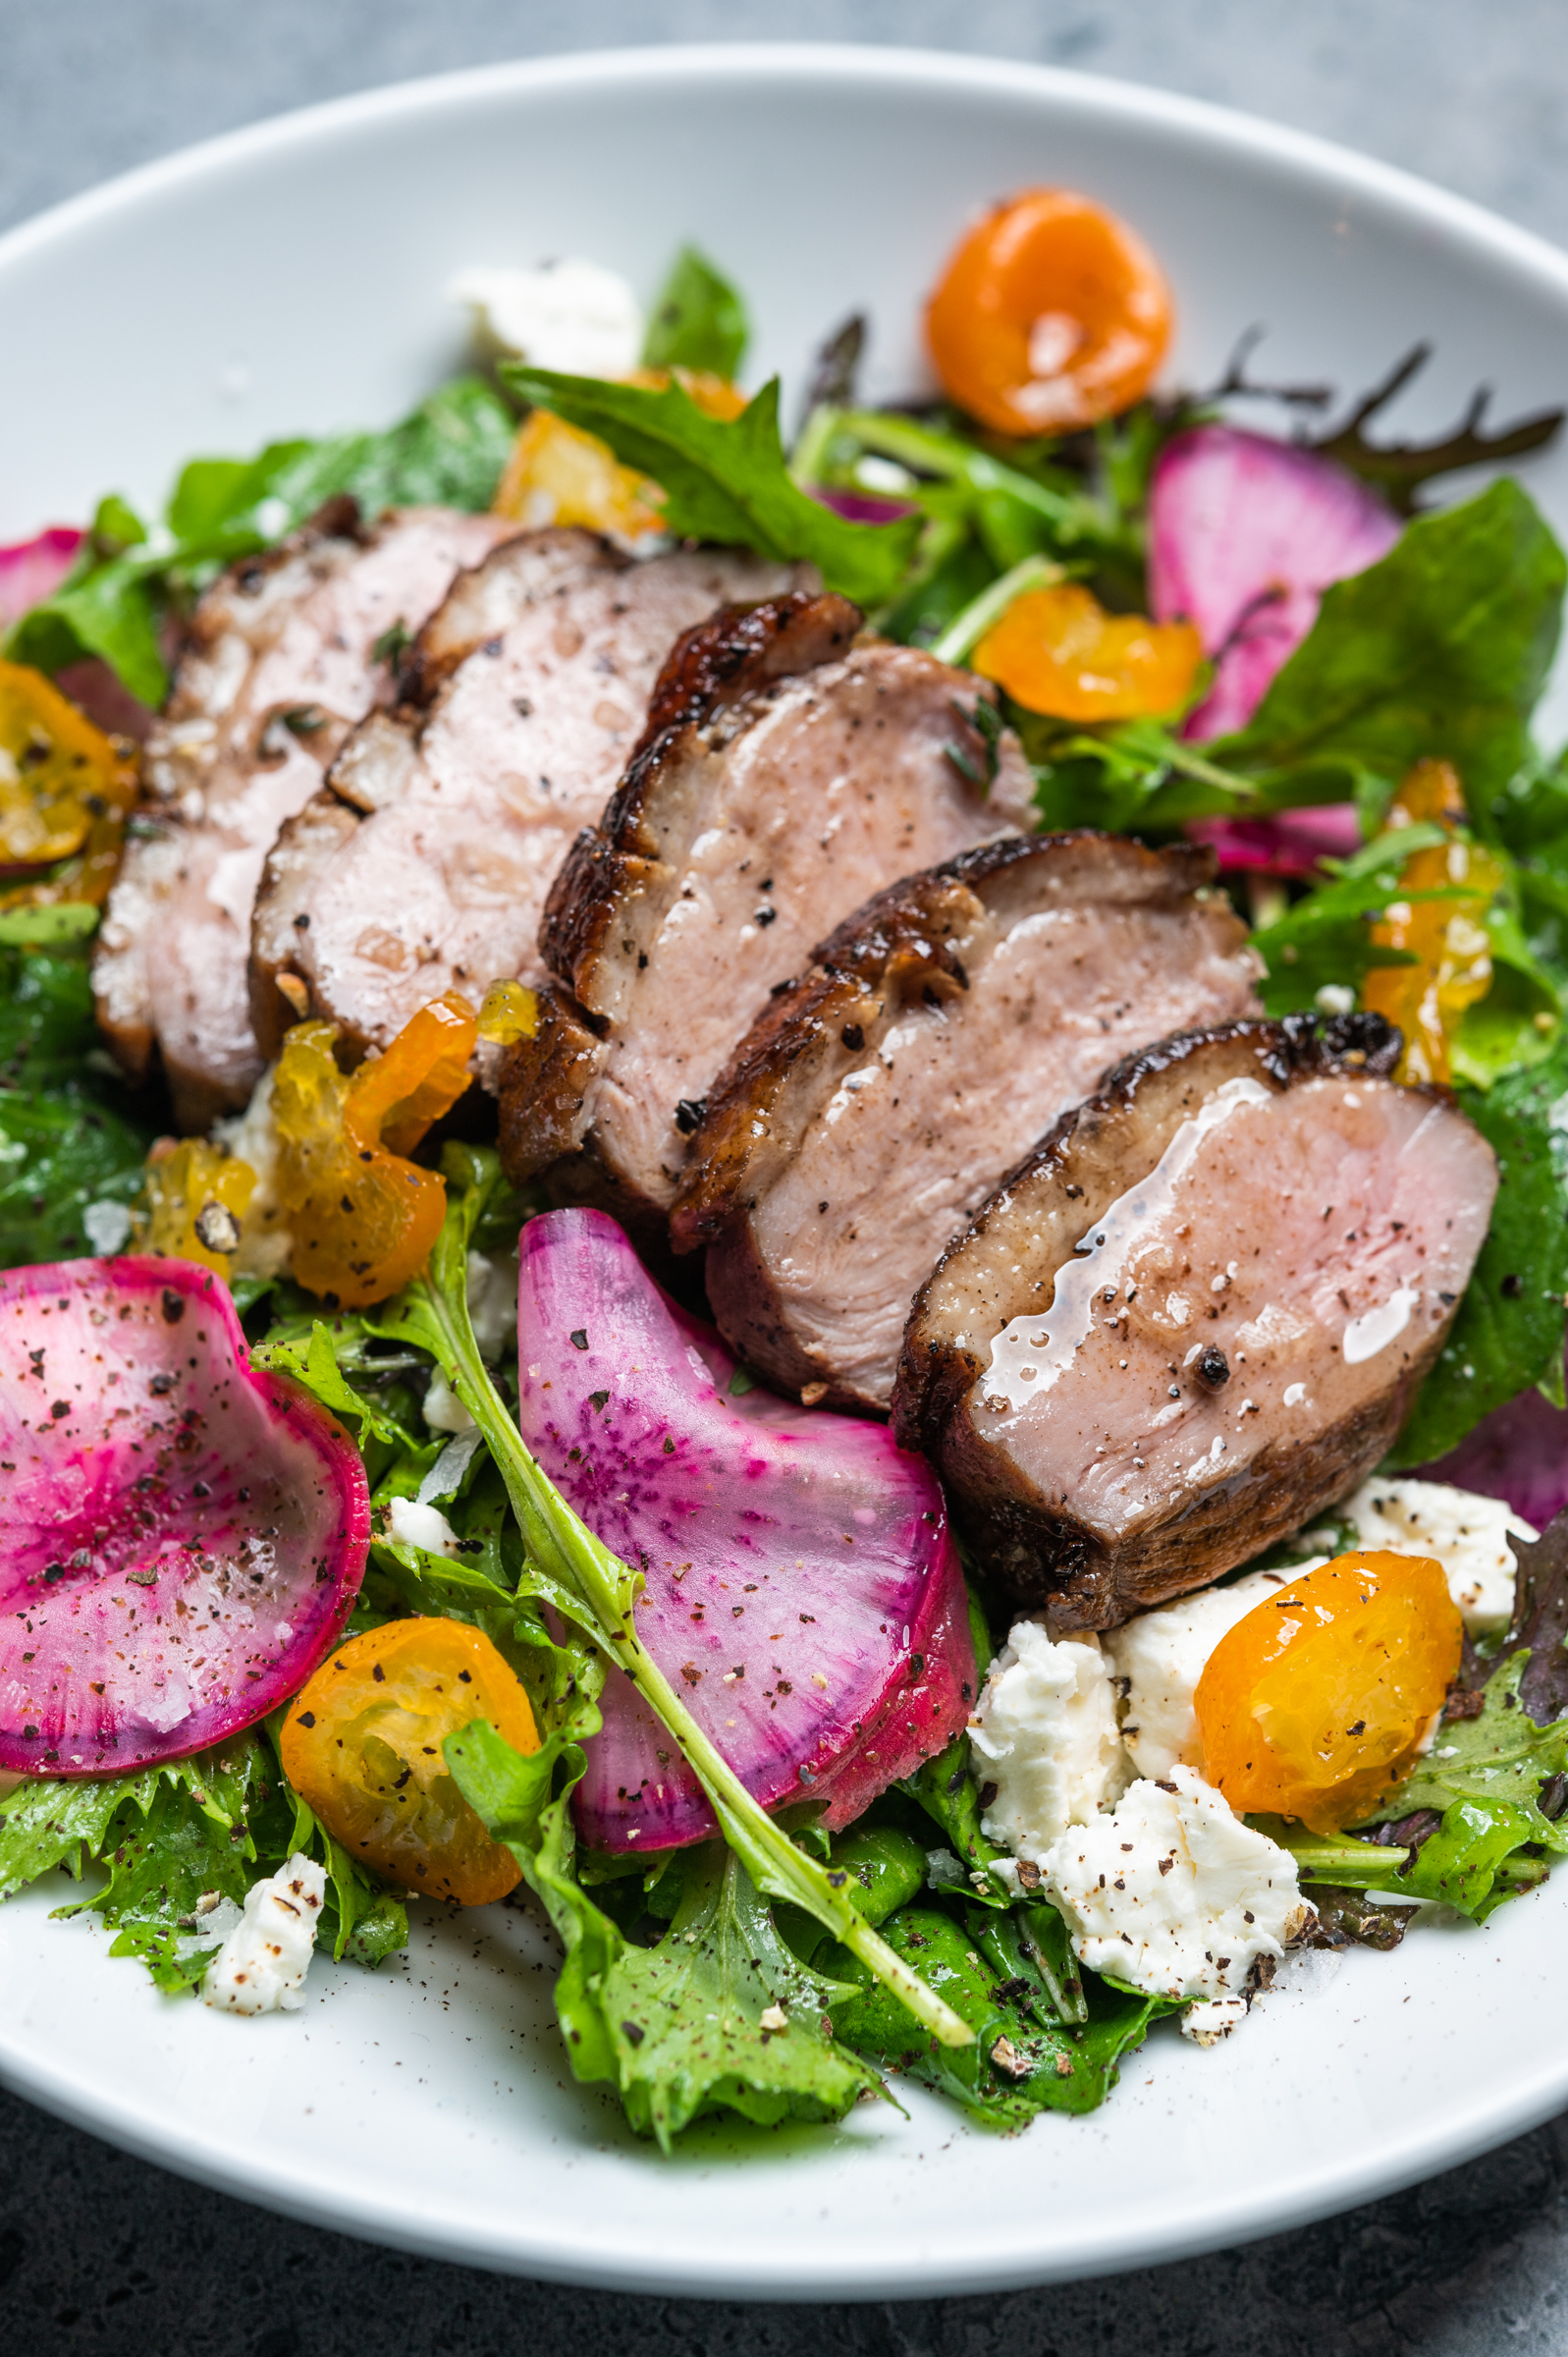 Sliced duck breast and candied kumquats over a salad of arugula, feta, pickled radishes and carrots